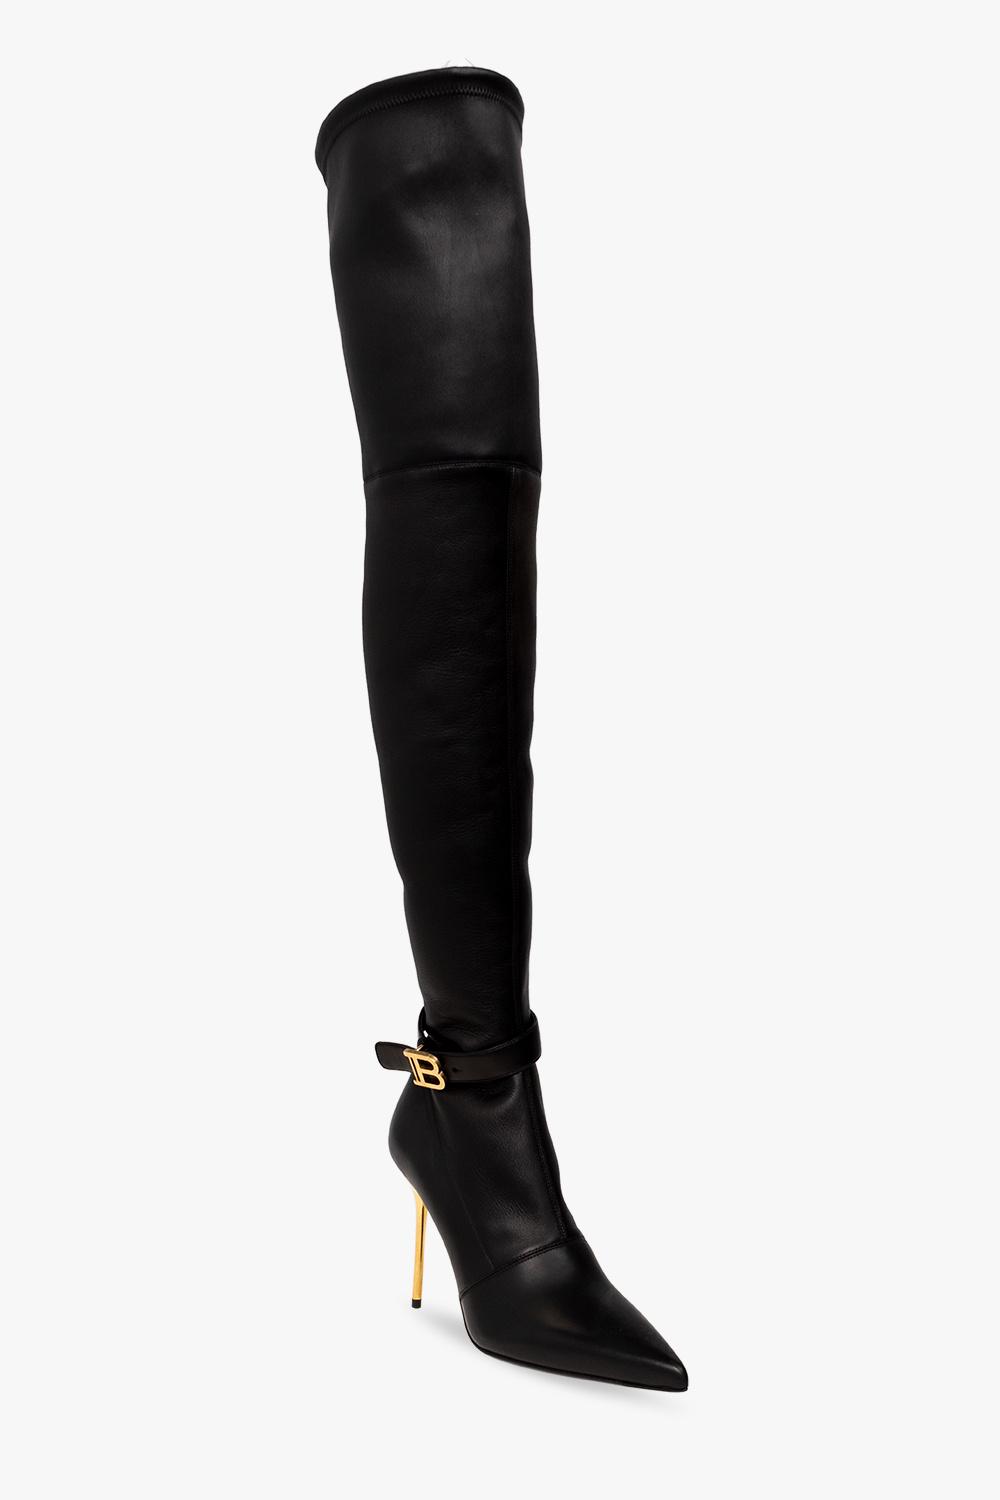 Balmain Leather Over-the-knee Boots in Black